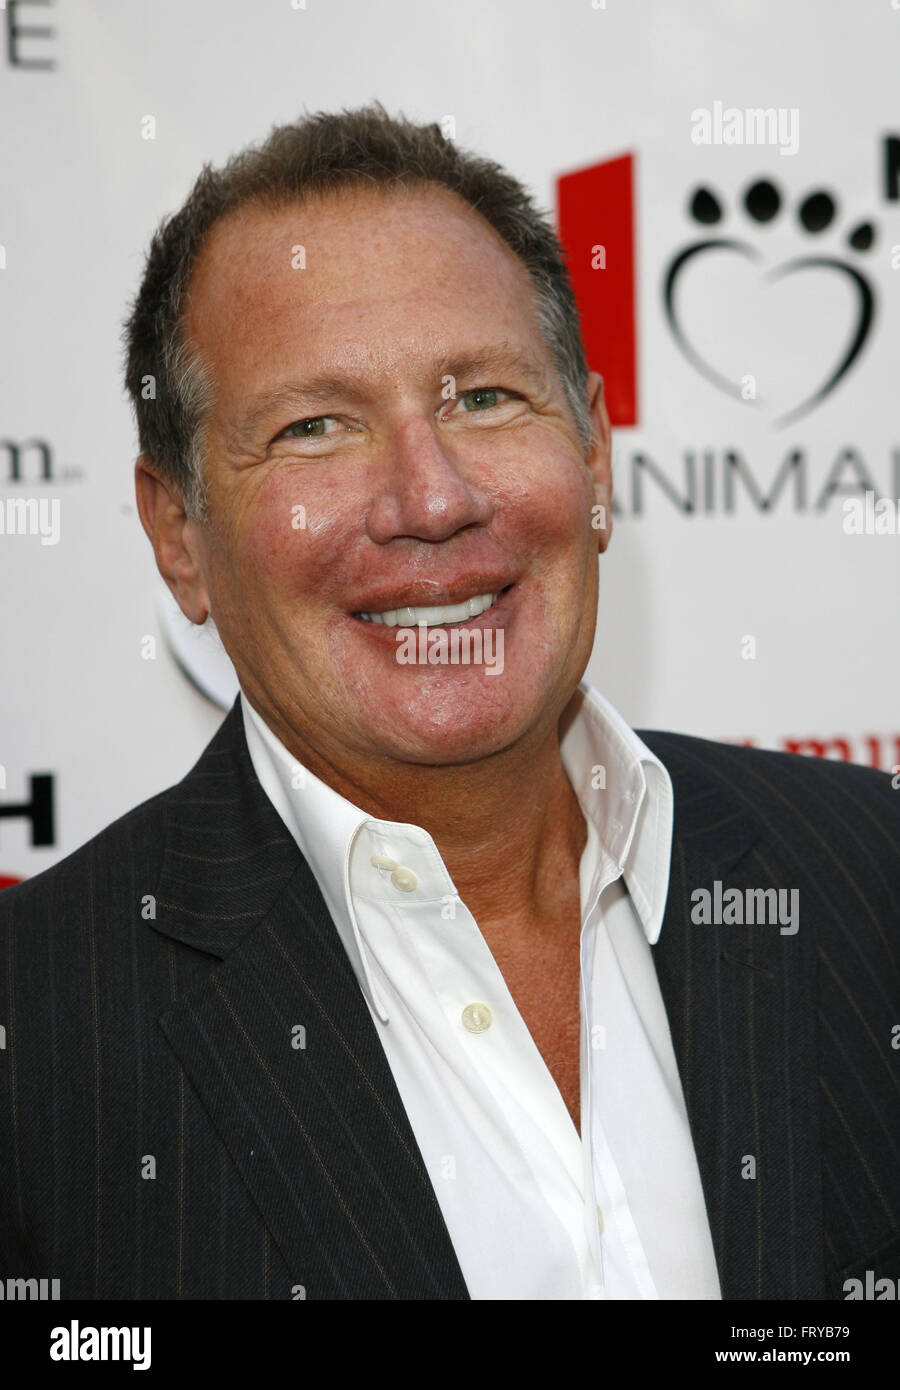 March 24, 2016 - Comedian Garry Shandling, star of the'Larry Sanders Show' and'It's Garry Shandling's Show' has died at 66. He reportedly died of a heart attack. PICTURED: July 19, 2008 - Holmby Hills, California, U.S. - Jul 19, 2008 - Holmby Hills, California, U.S. - GARRY SHANDLING attends the 2nd Annual Bow Wow WOW! Charity fundraiser for animals event at the Playboy Mansion. (Credit Image: © Patrick Fallon/ZUMApress.com) Stock Photo